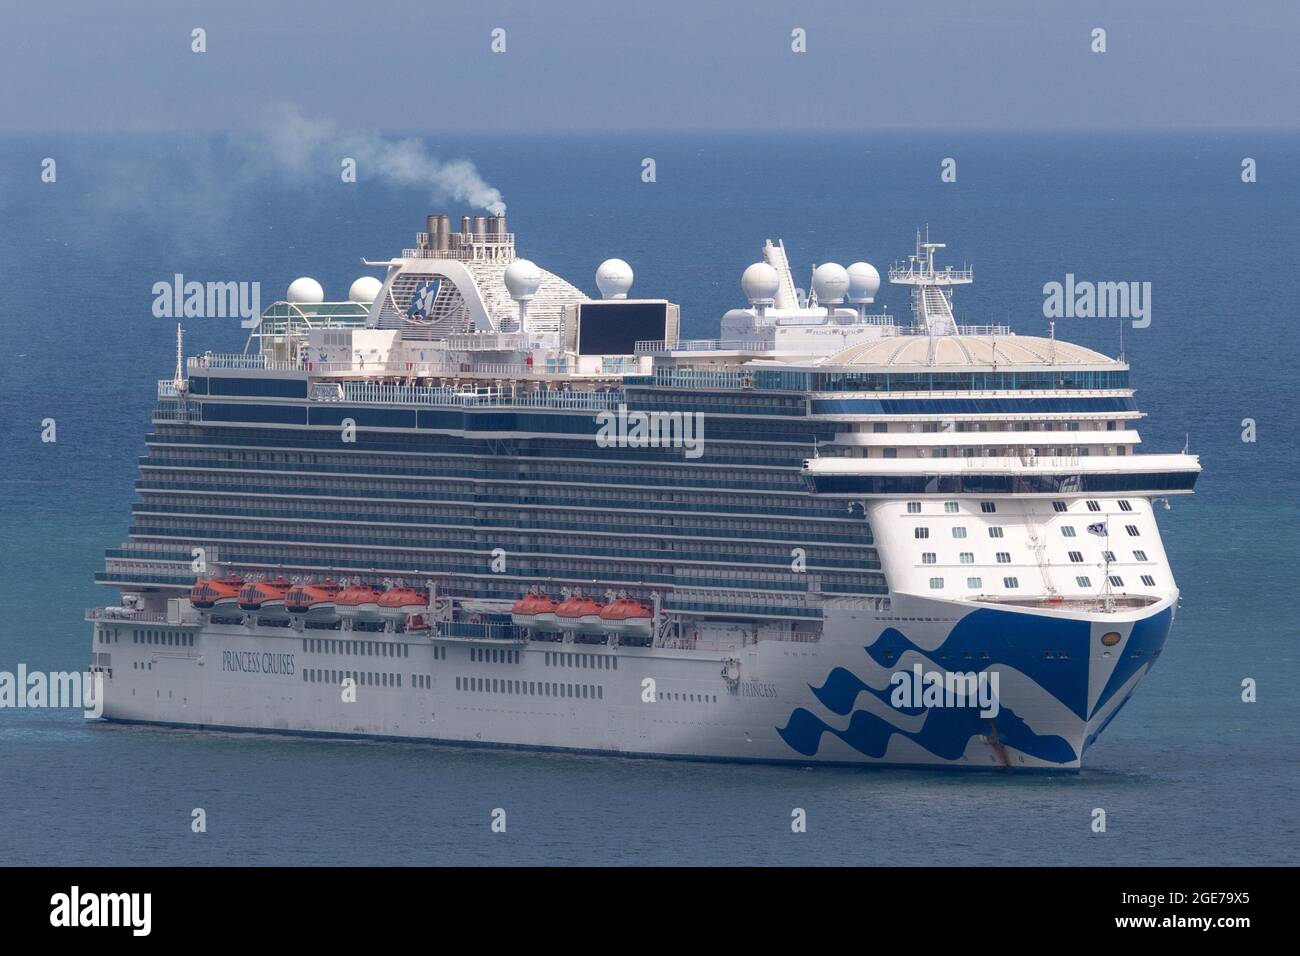 The huge Sky Princess cruise ship sits in waters off the coast of Torbay, Devon, UK. Stock Photo